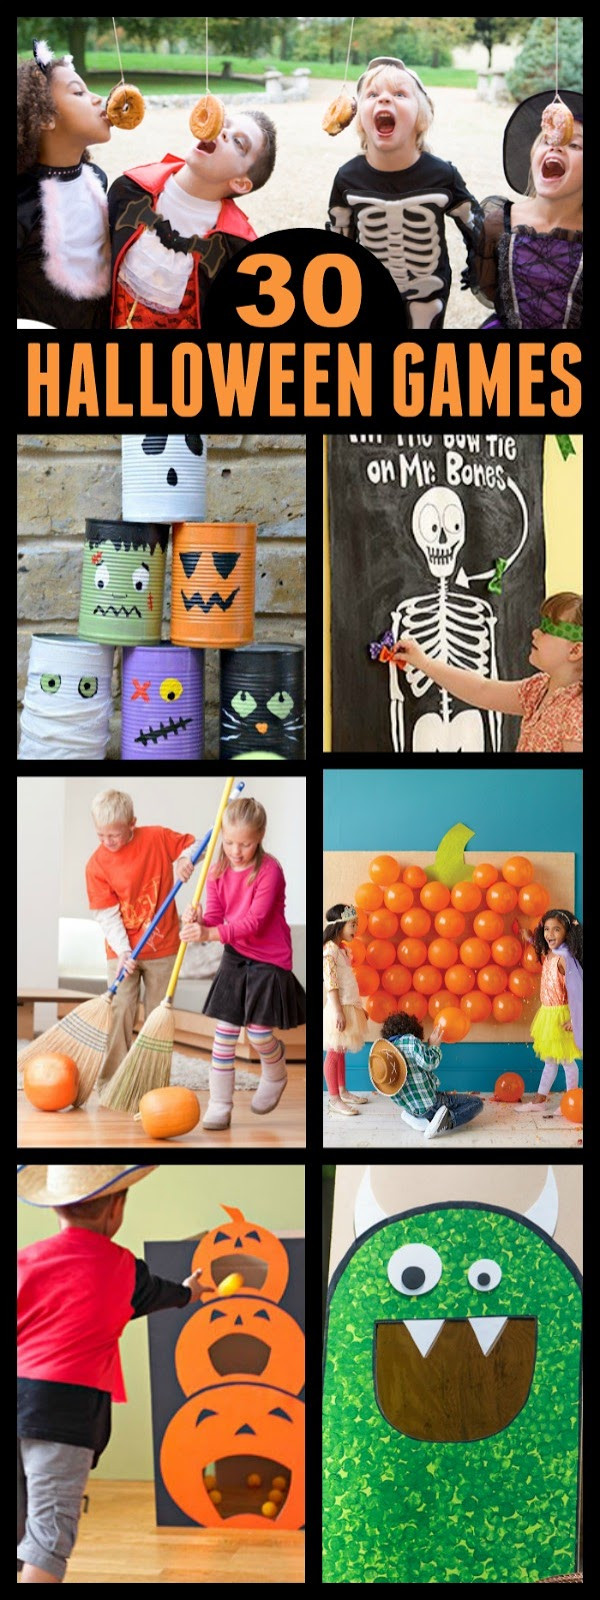 Ideas For Halloween Party Games
 Halloween Games for Kids